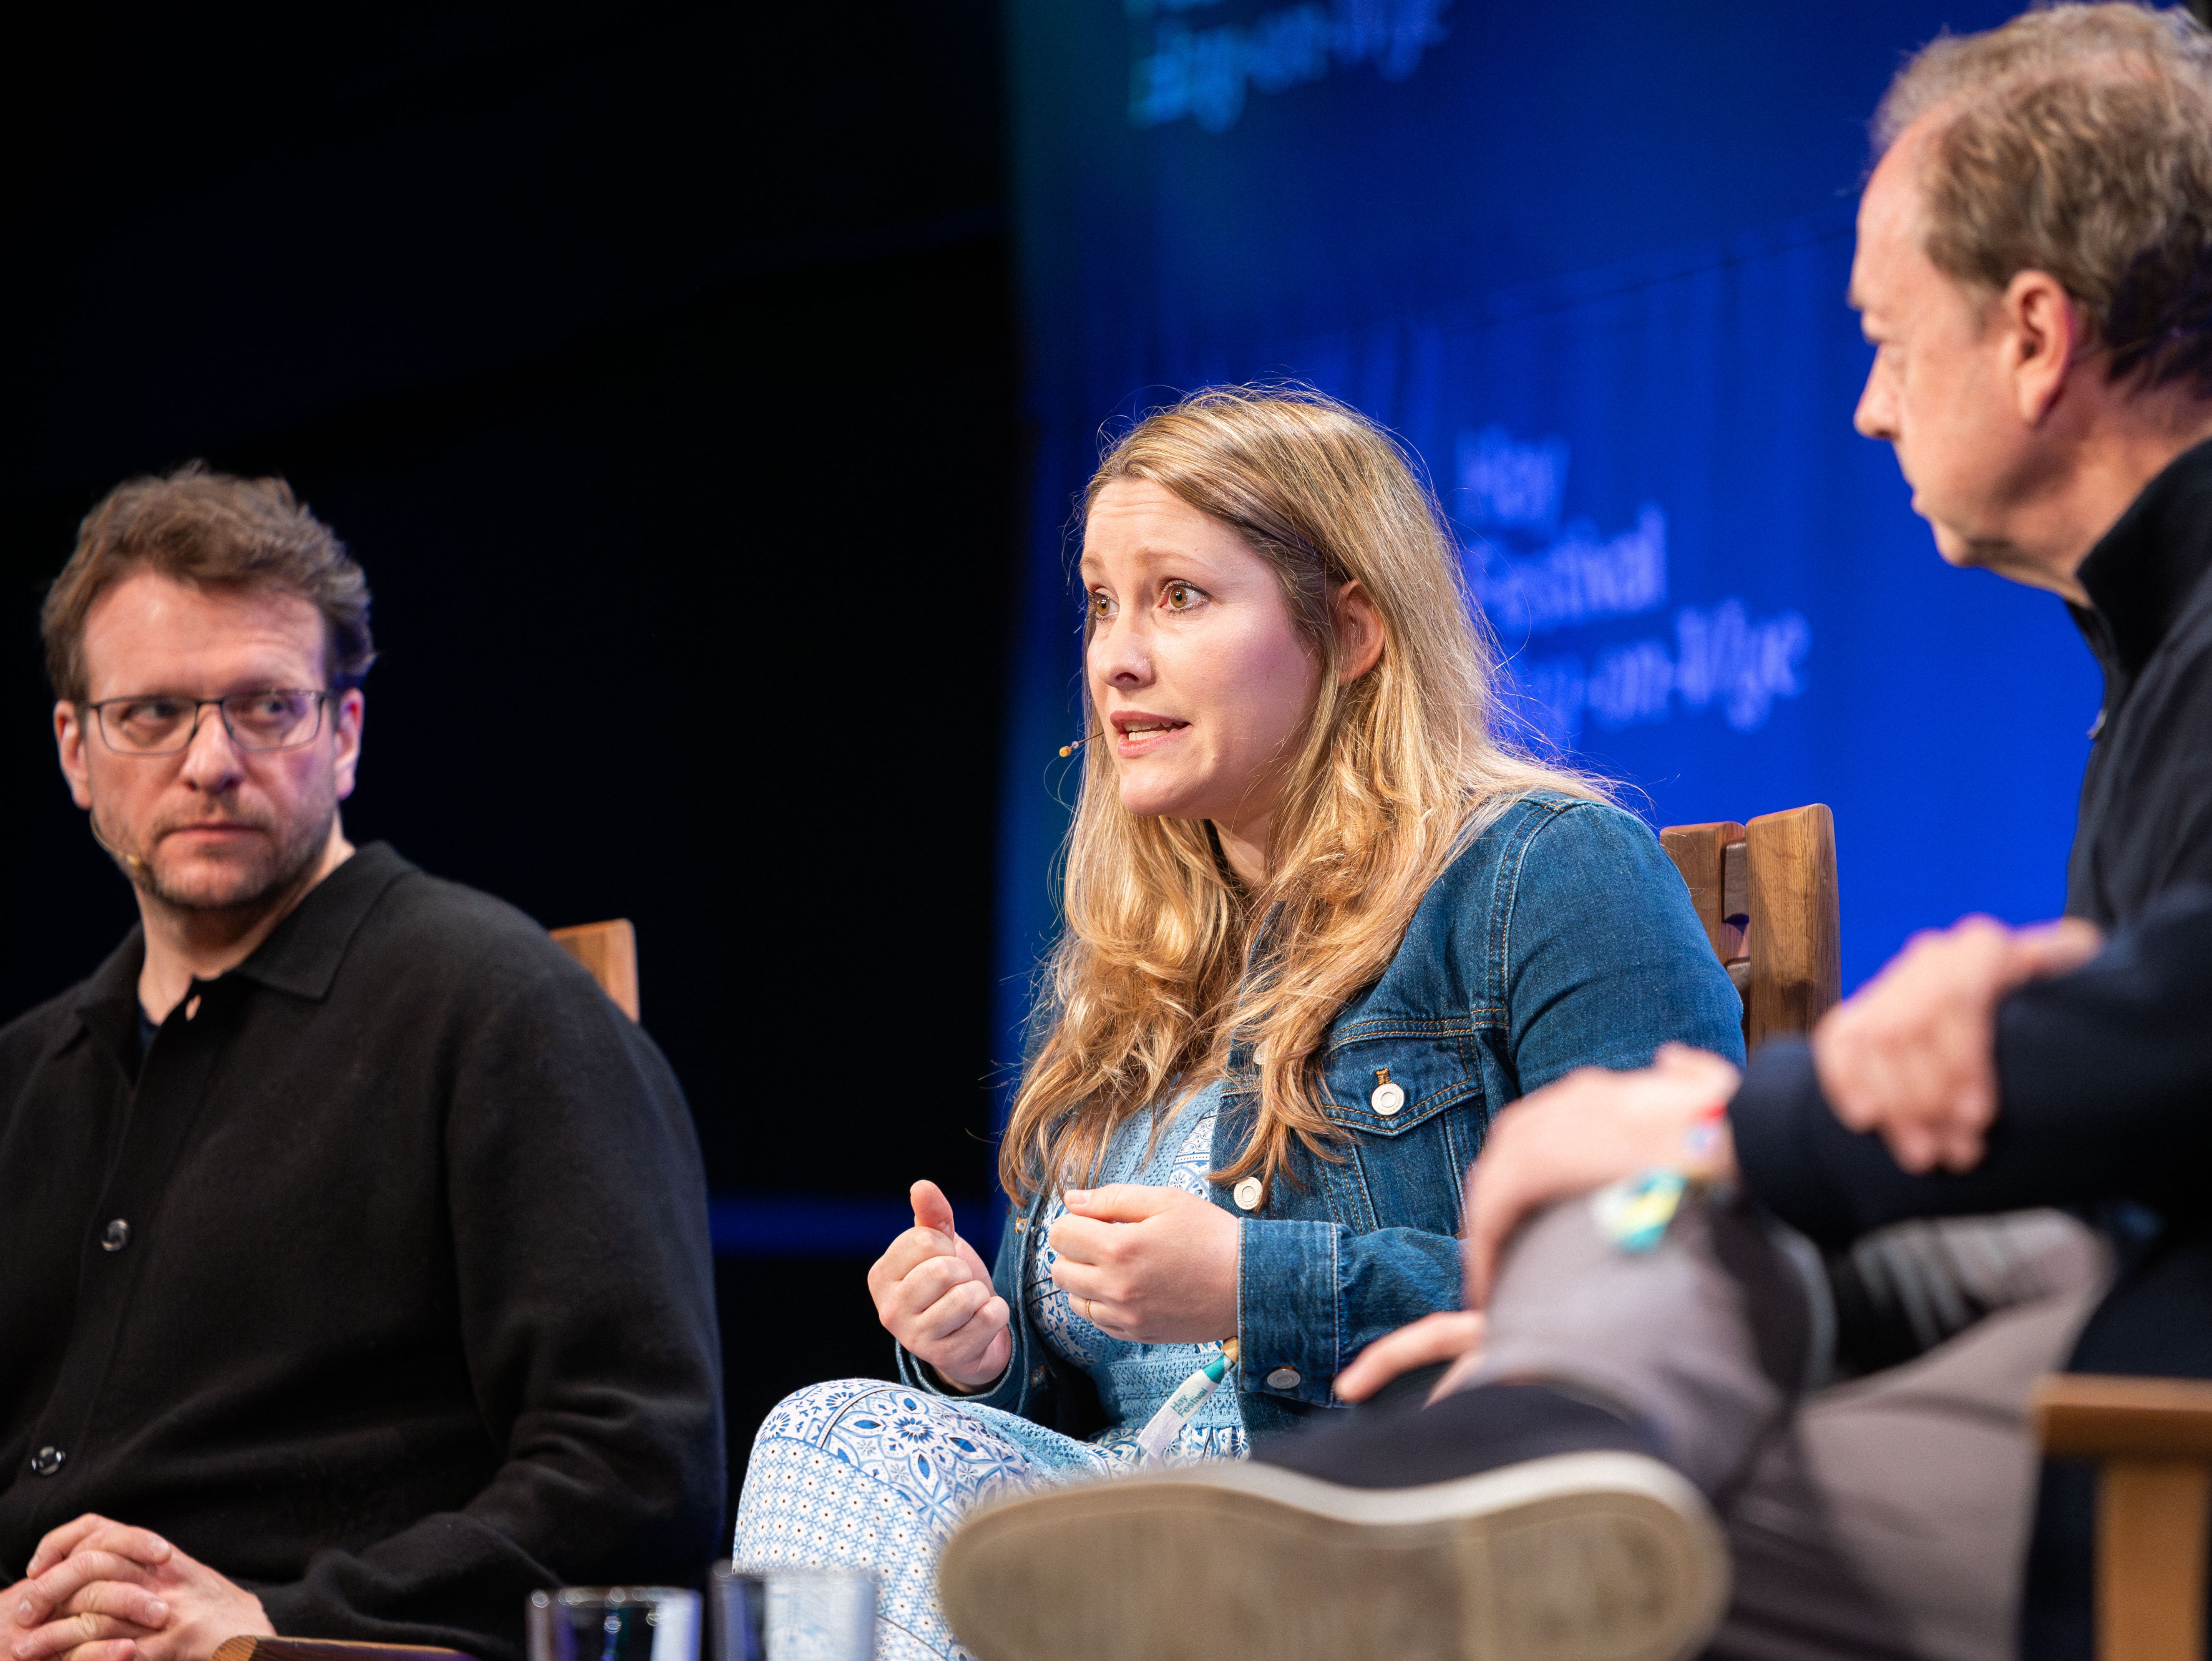 Peter Pomerantsev, Laura Bates and Geordie Greig during a conversation at Hay Festival